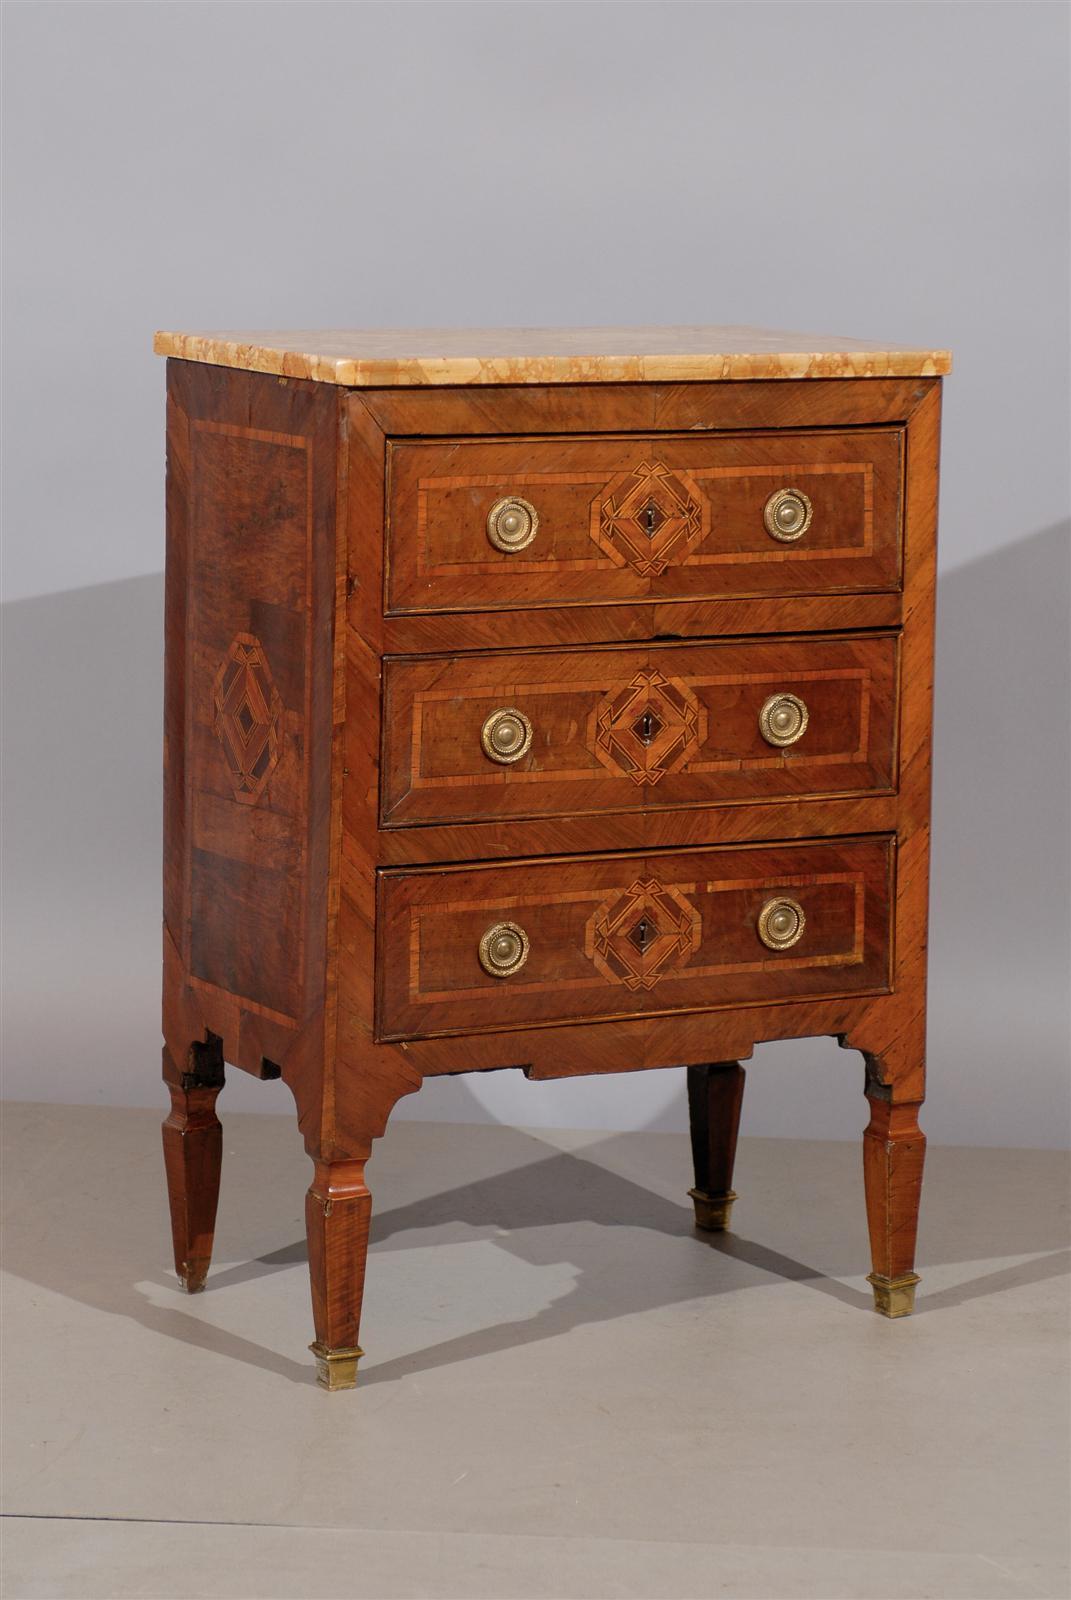 Neoclassical parquetry inlaid commodini with marble top and three drawers, carved apron, tapered legs with brass feet. 

William Word fine antiques: Atlanta's source for antique interiors since 1956.